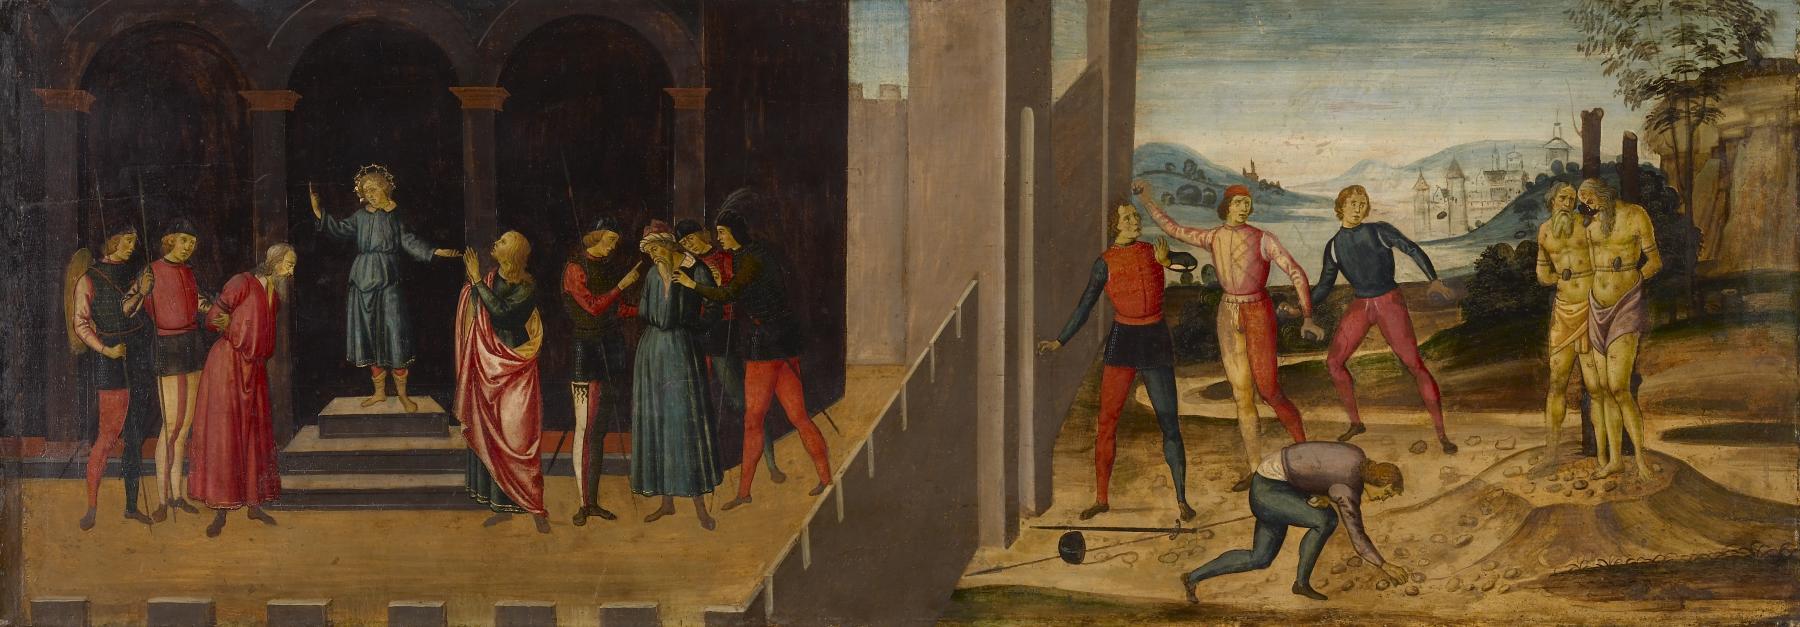 Image for The Story of Susanna: The Trial and Stoning of the Elders